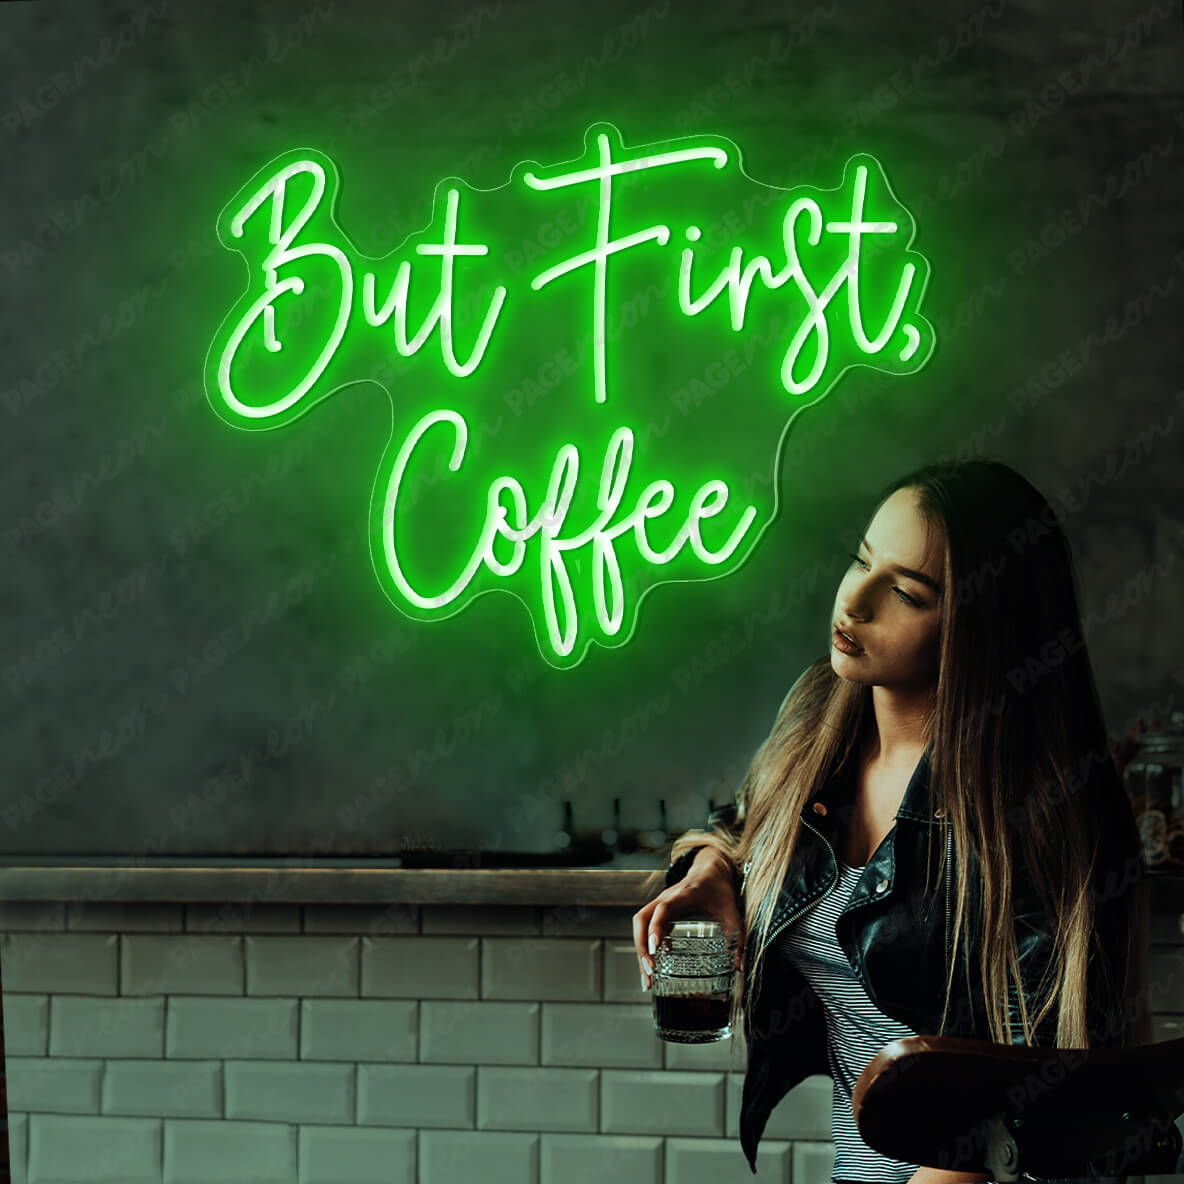 But First Coffee Neon Sign Led Light Green